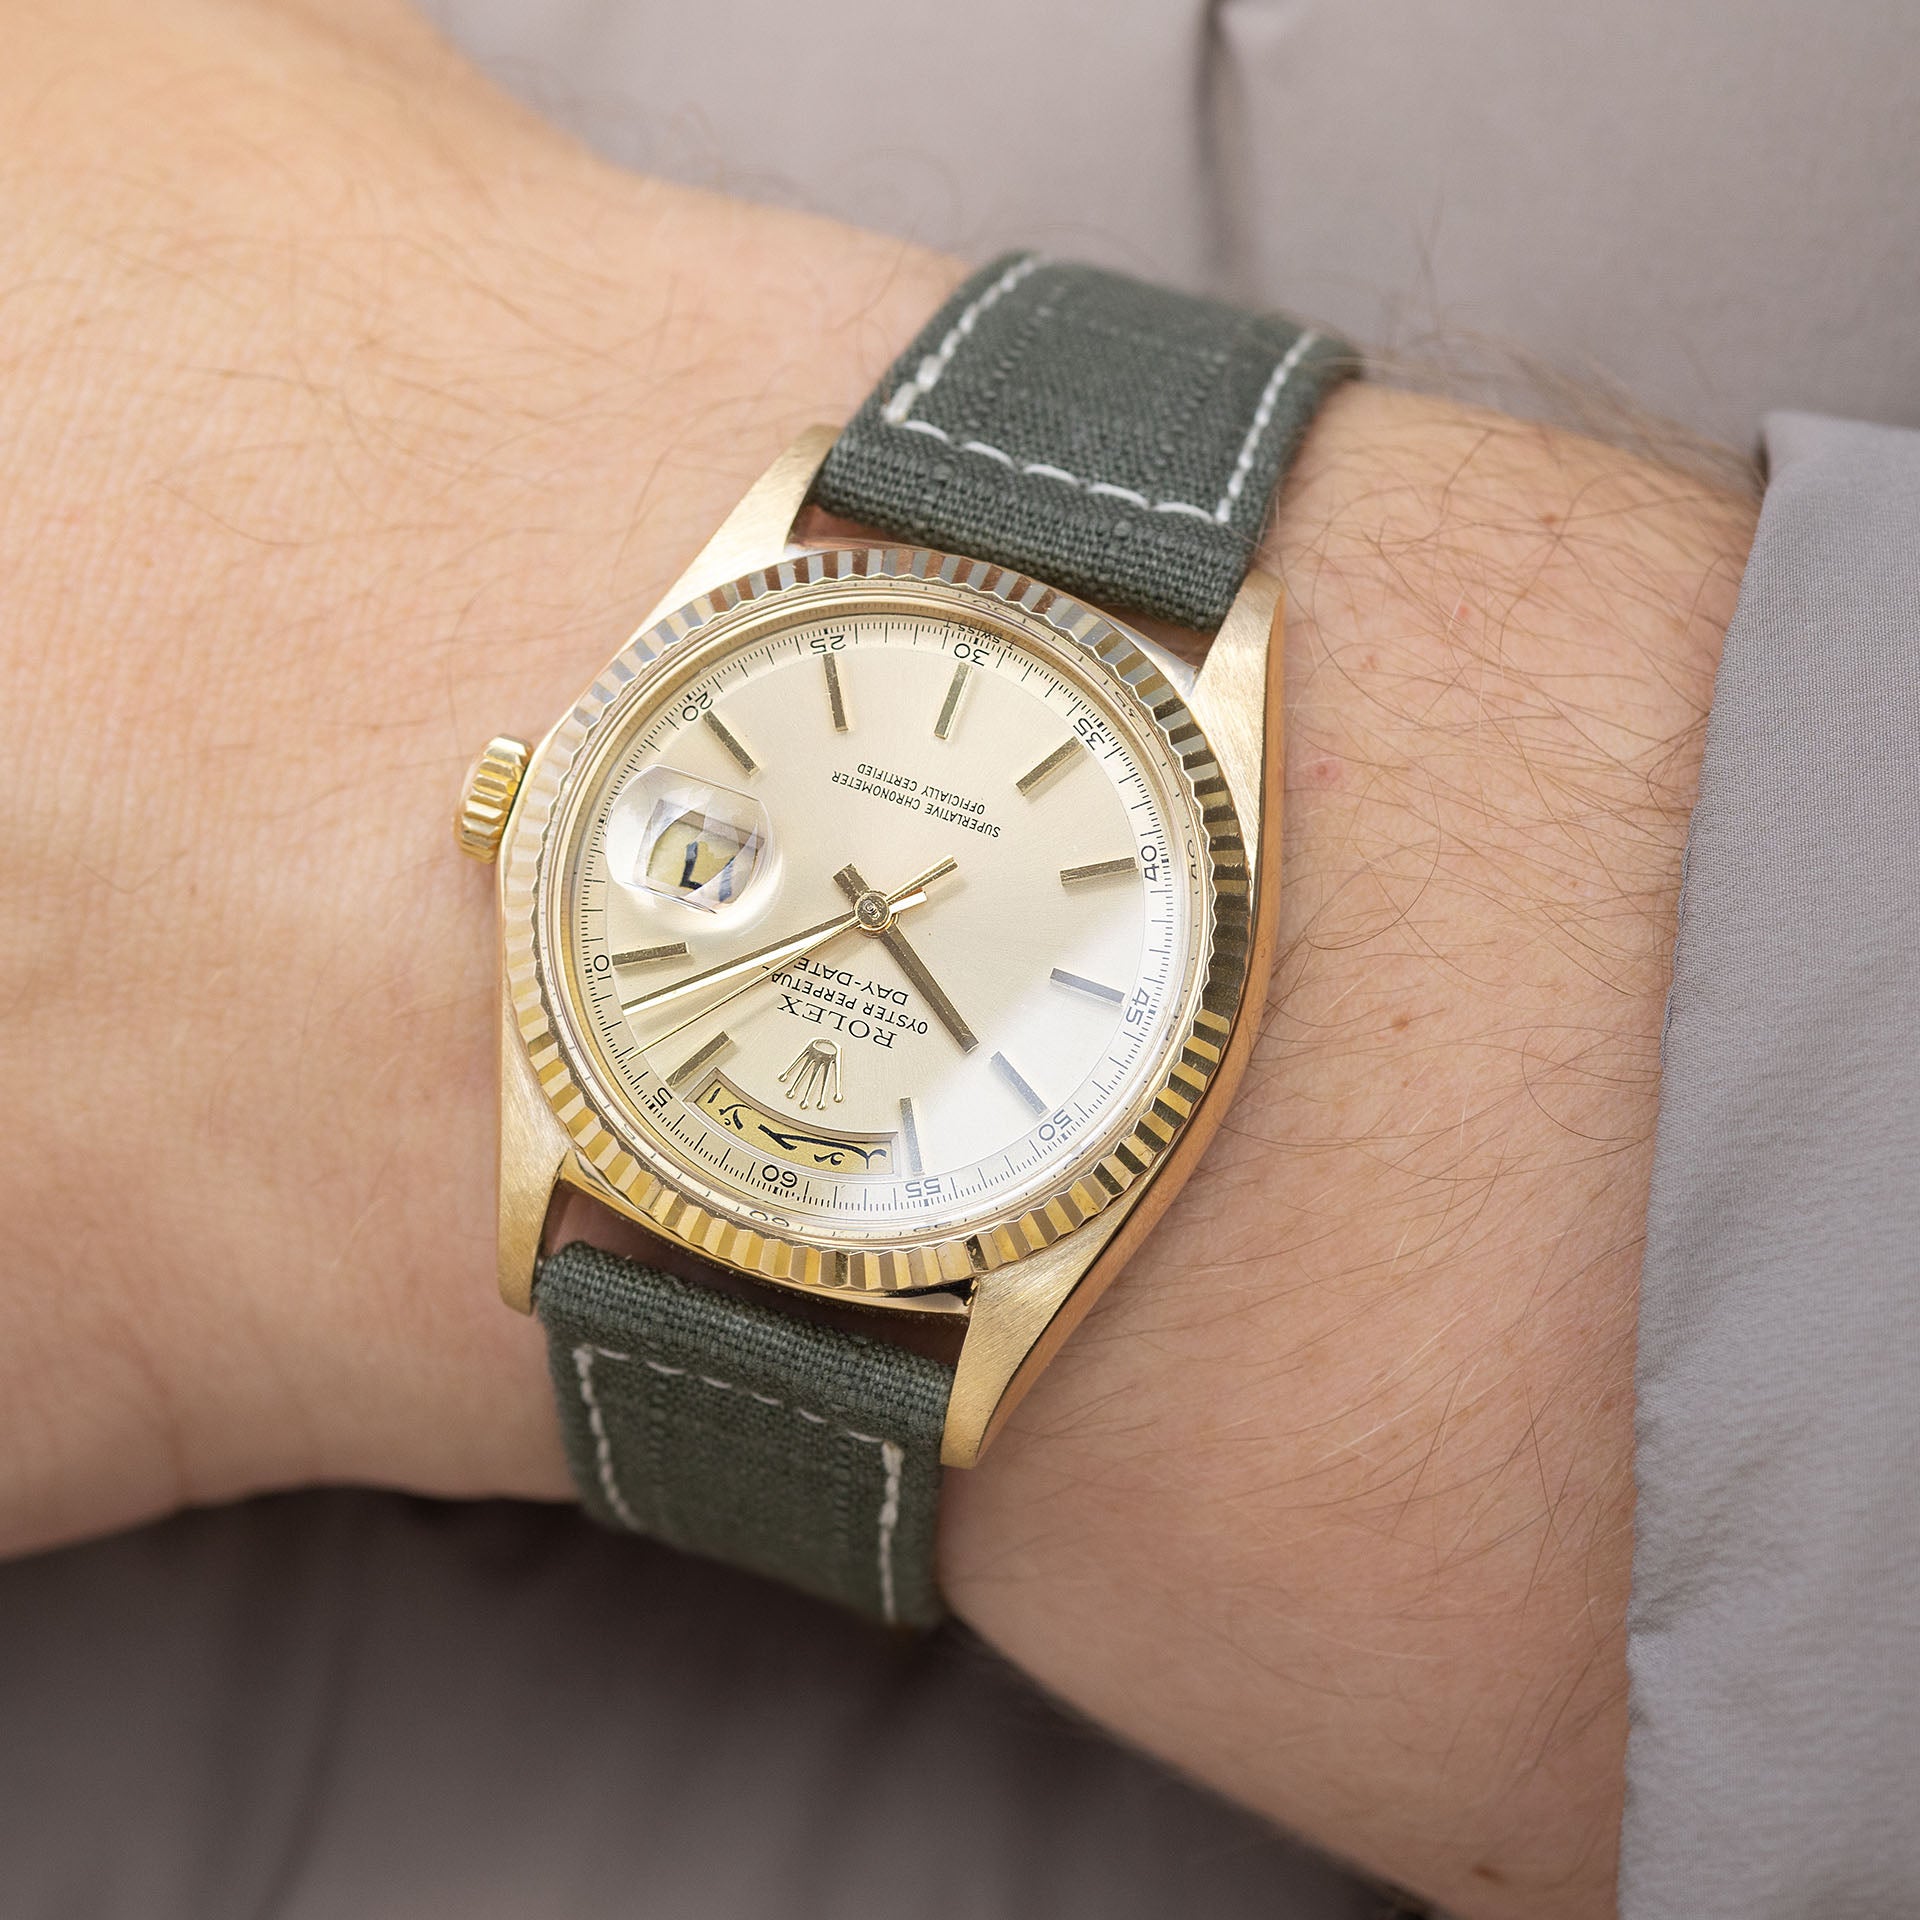 The Ripstop Watch Strap on a Rolex Day-Date 1803